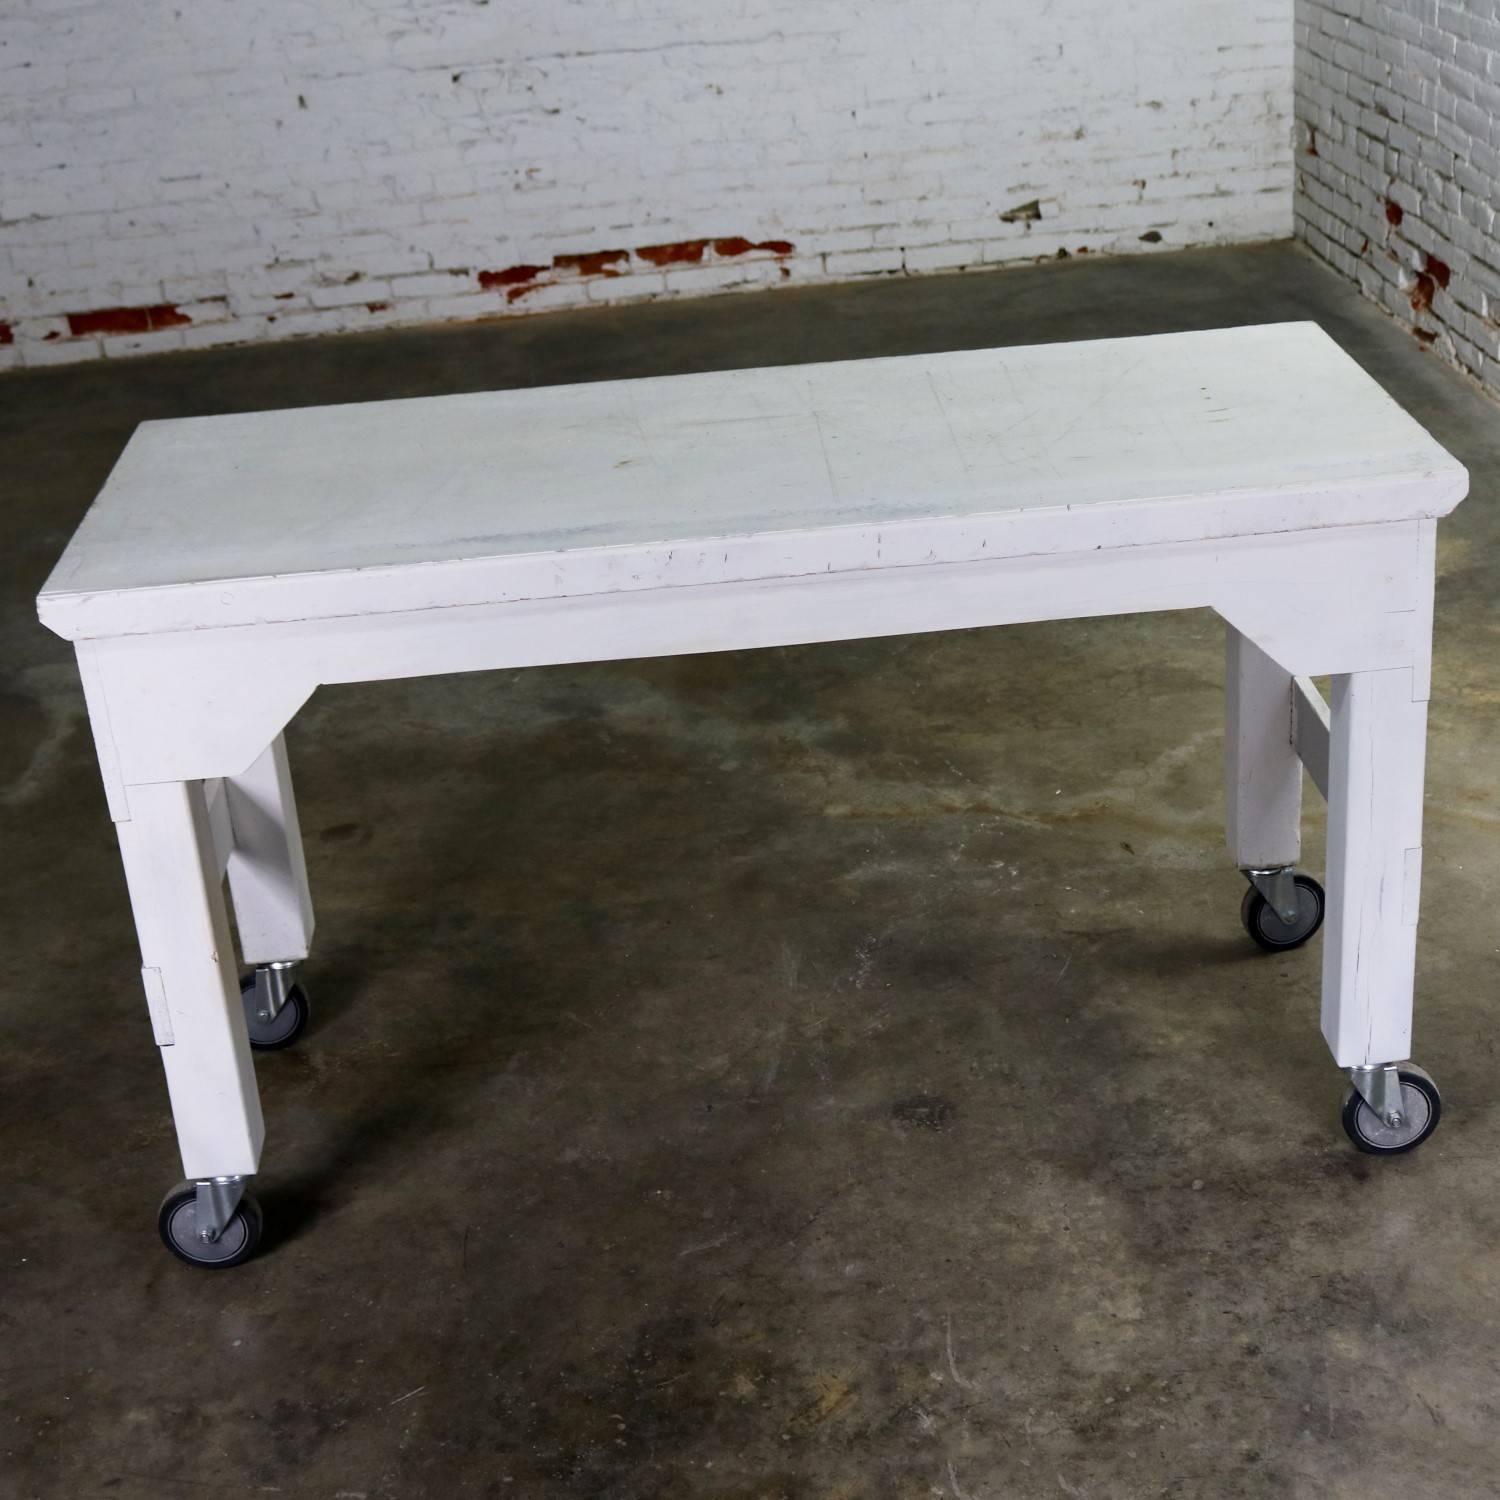 Wonderful primitive white painted rolling work table or kitchen island in a farmhouse or industrial style. This piece is in awesome condition with a beautiful distressed finish and patina, circa 20th century.

We found this primitive distressed